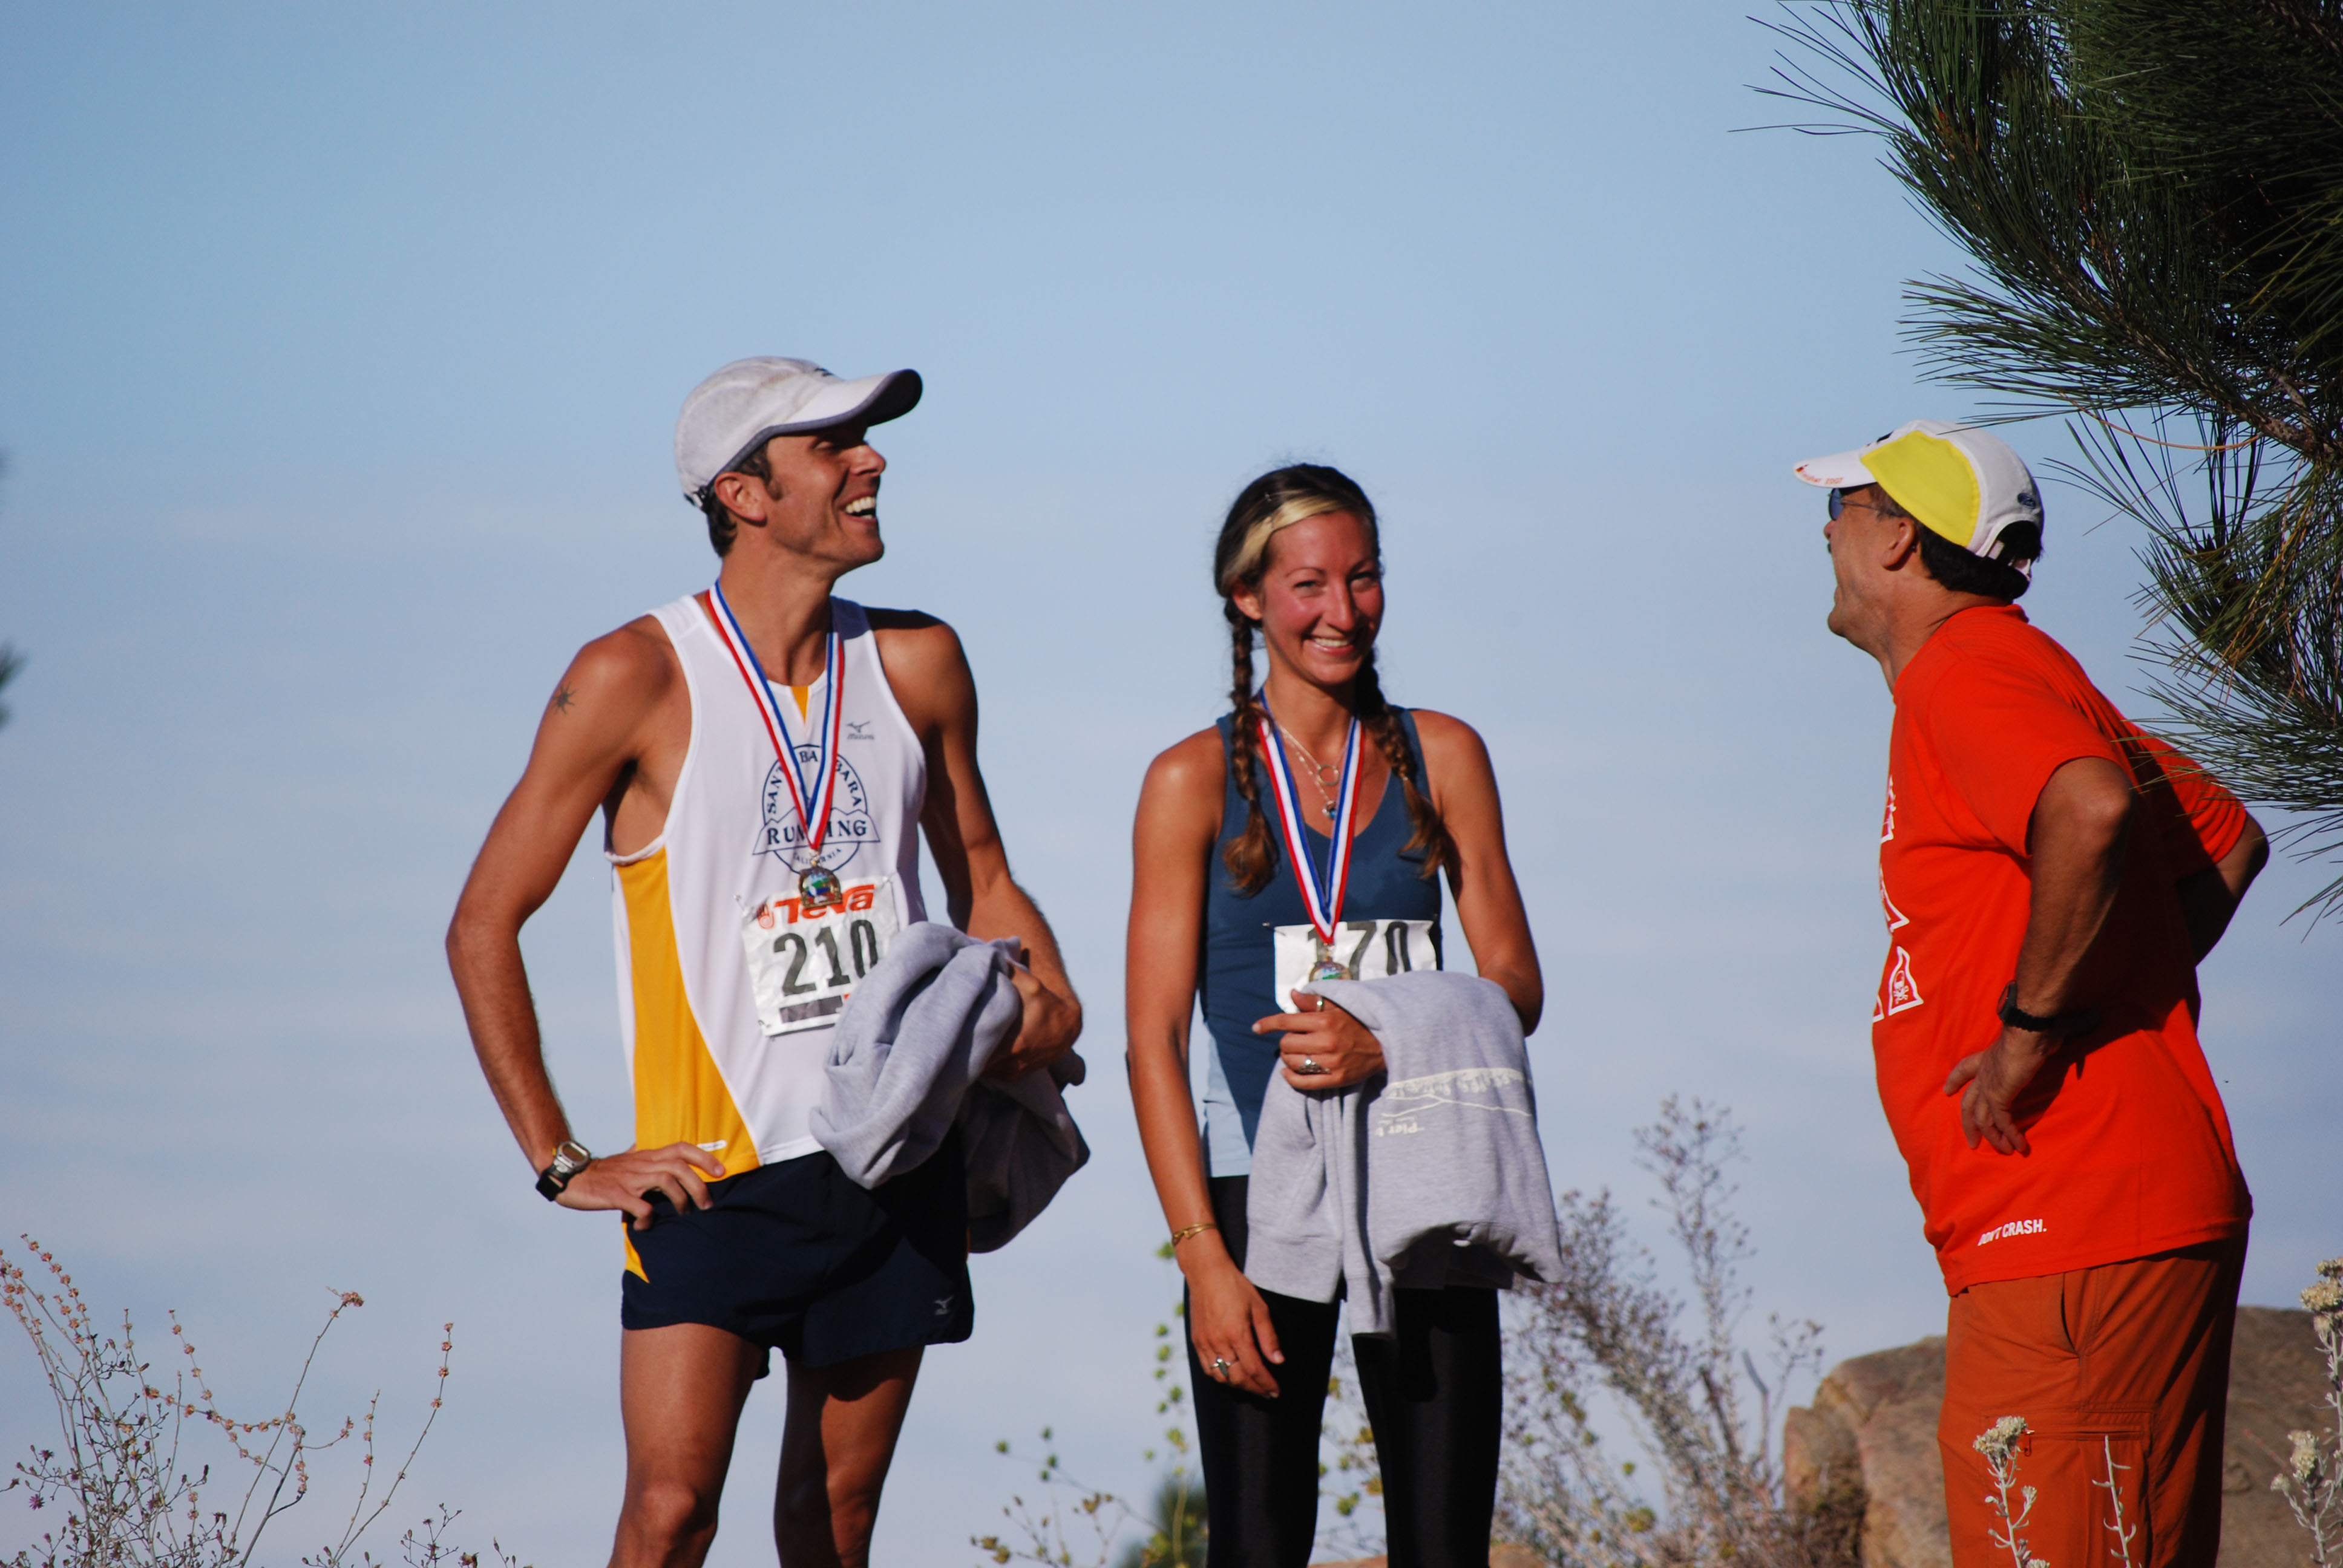 Men's winner Aaron Gillen, left, and women's winner Sara Dillman are all smiles shortly after completing the 13.1-mile climb that is the annual Pier-to-Peak Half-Marathon